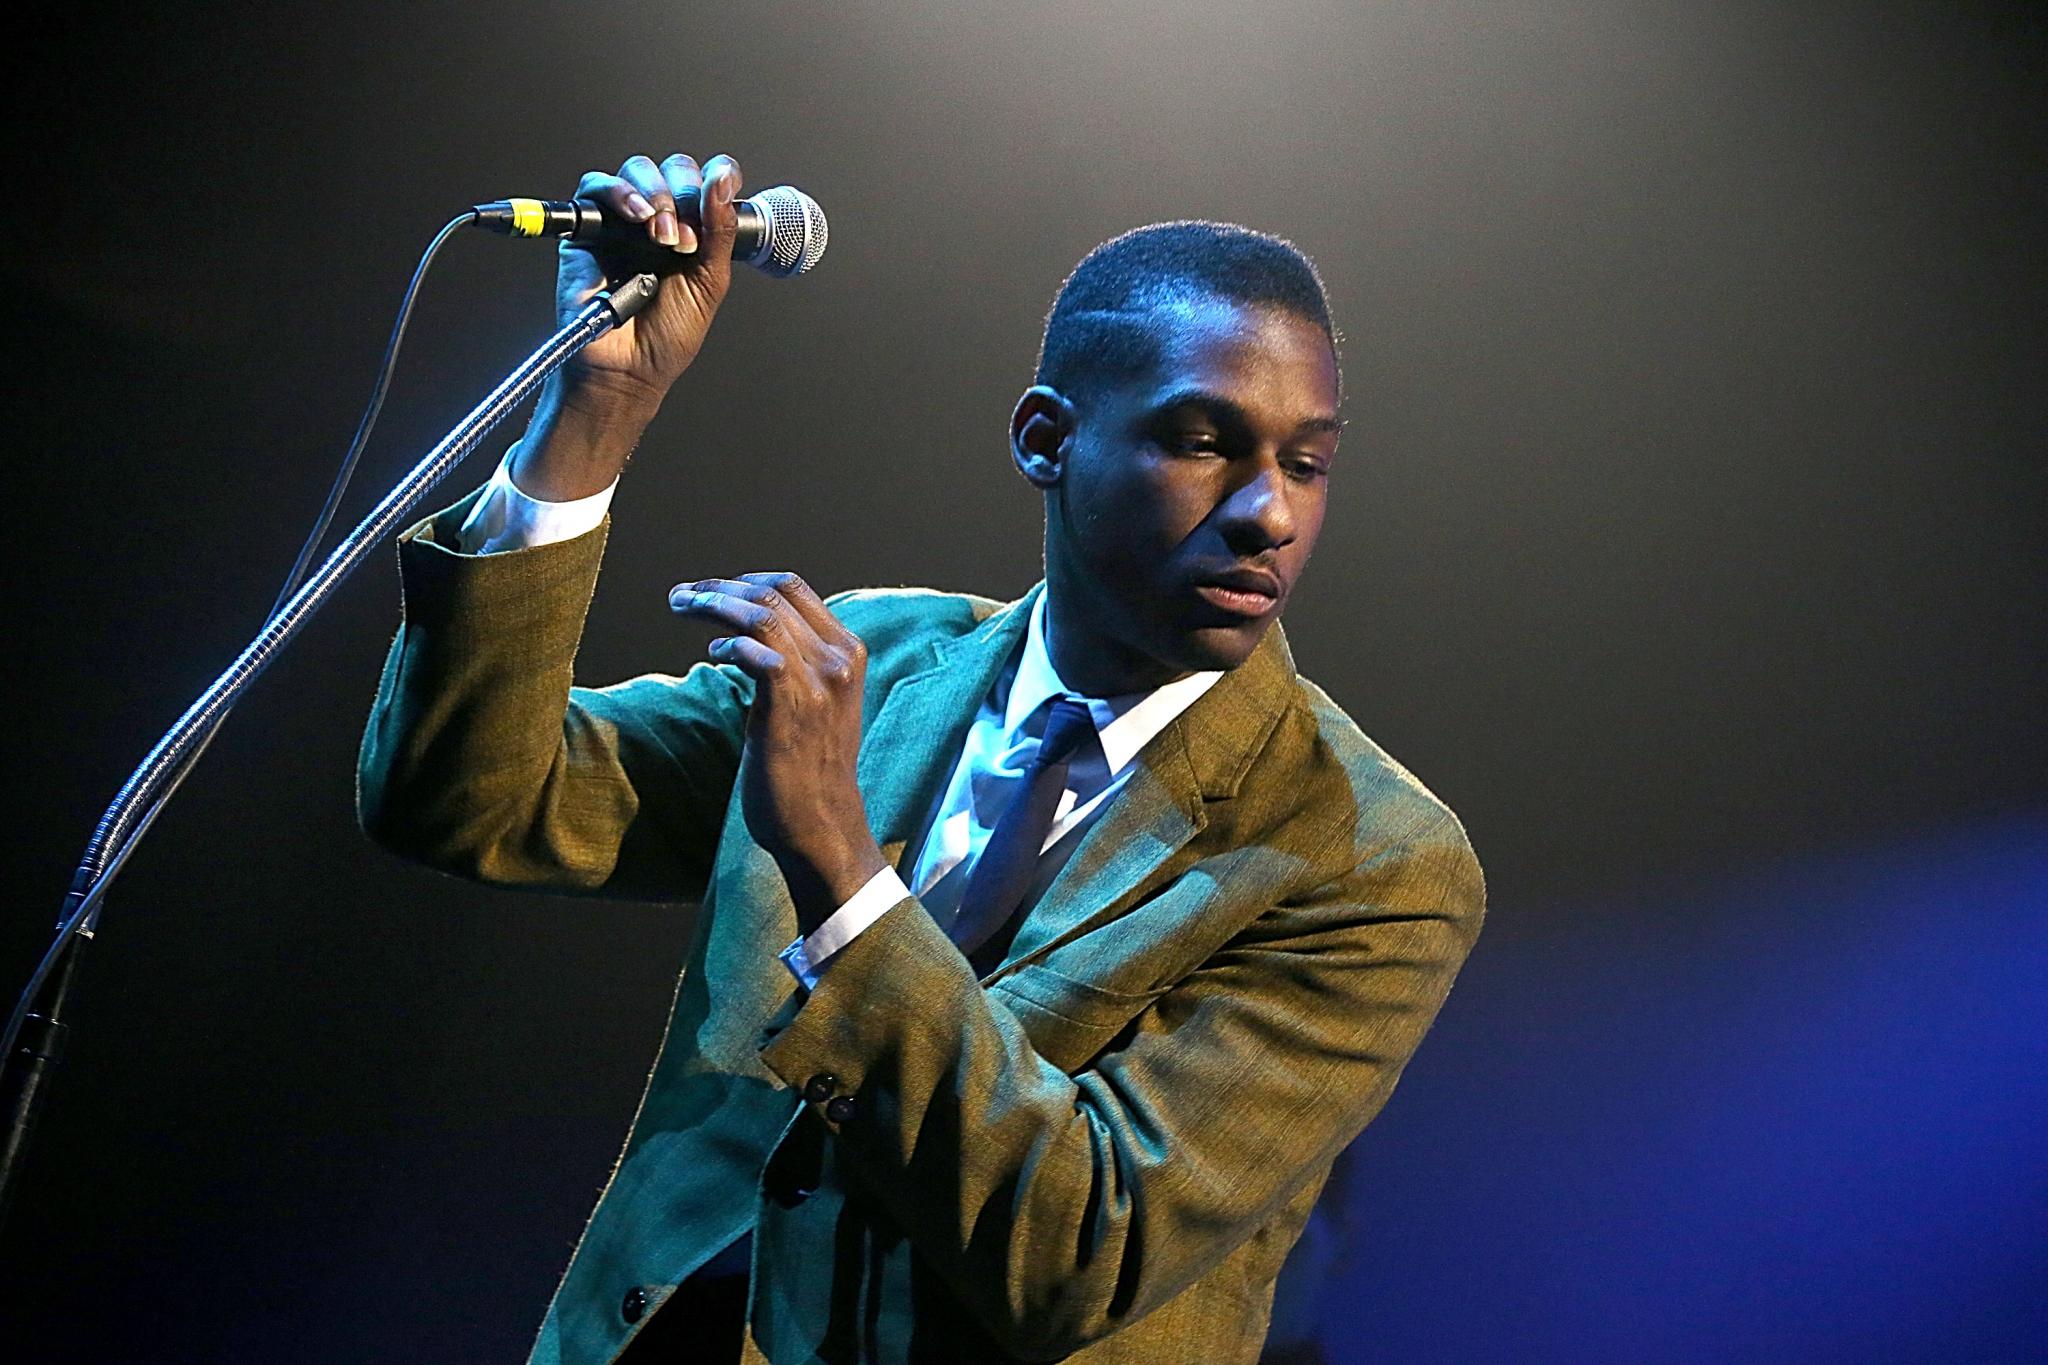 Leon Bridges on His Throwback Soul Sound, and the Social Message Behind His Powerful New Video 'River'